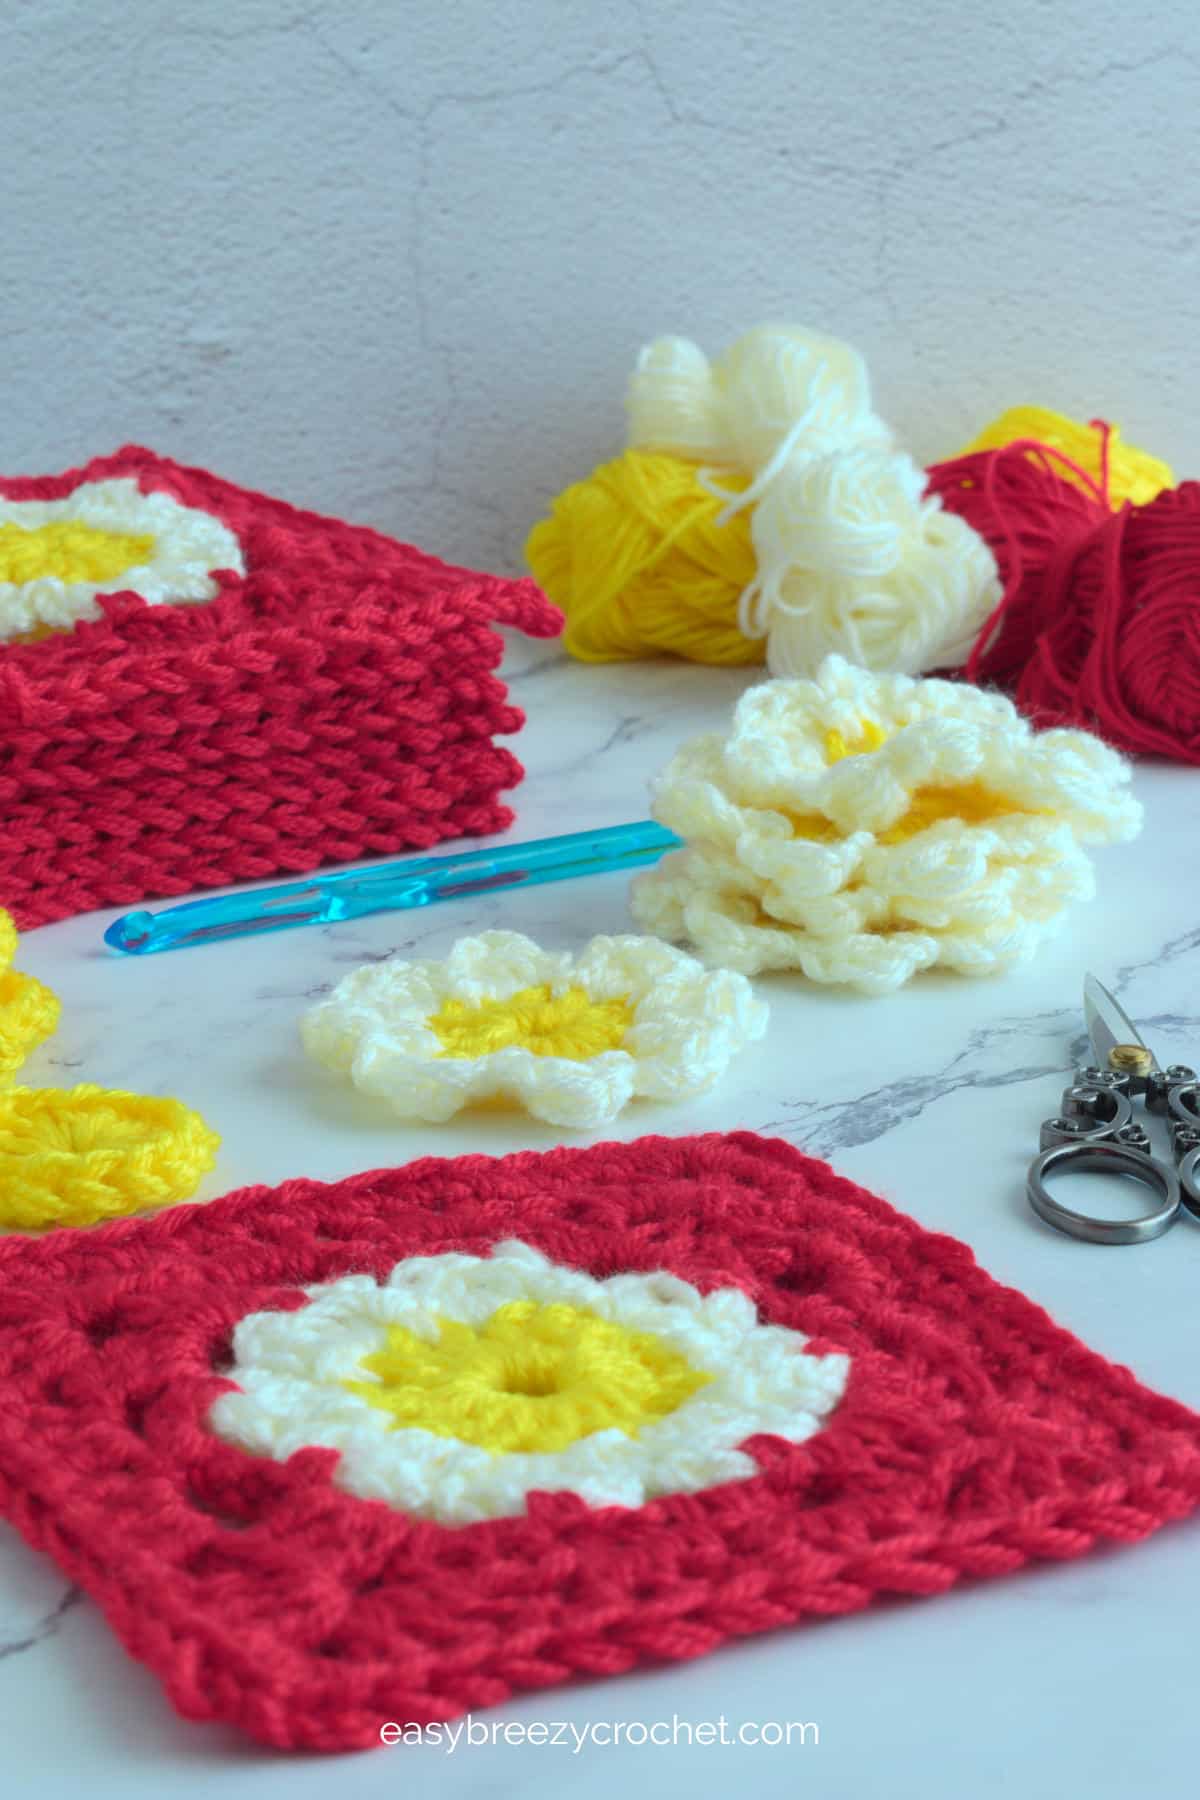 Image showing different stages of crocheting a large lacy granny square.